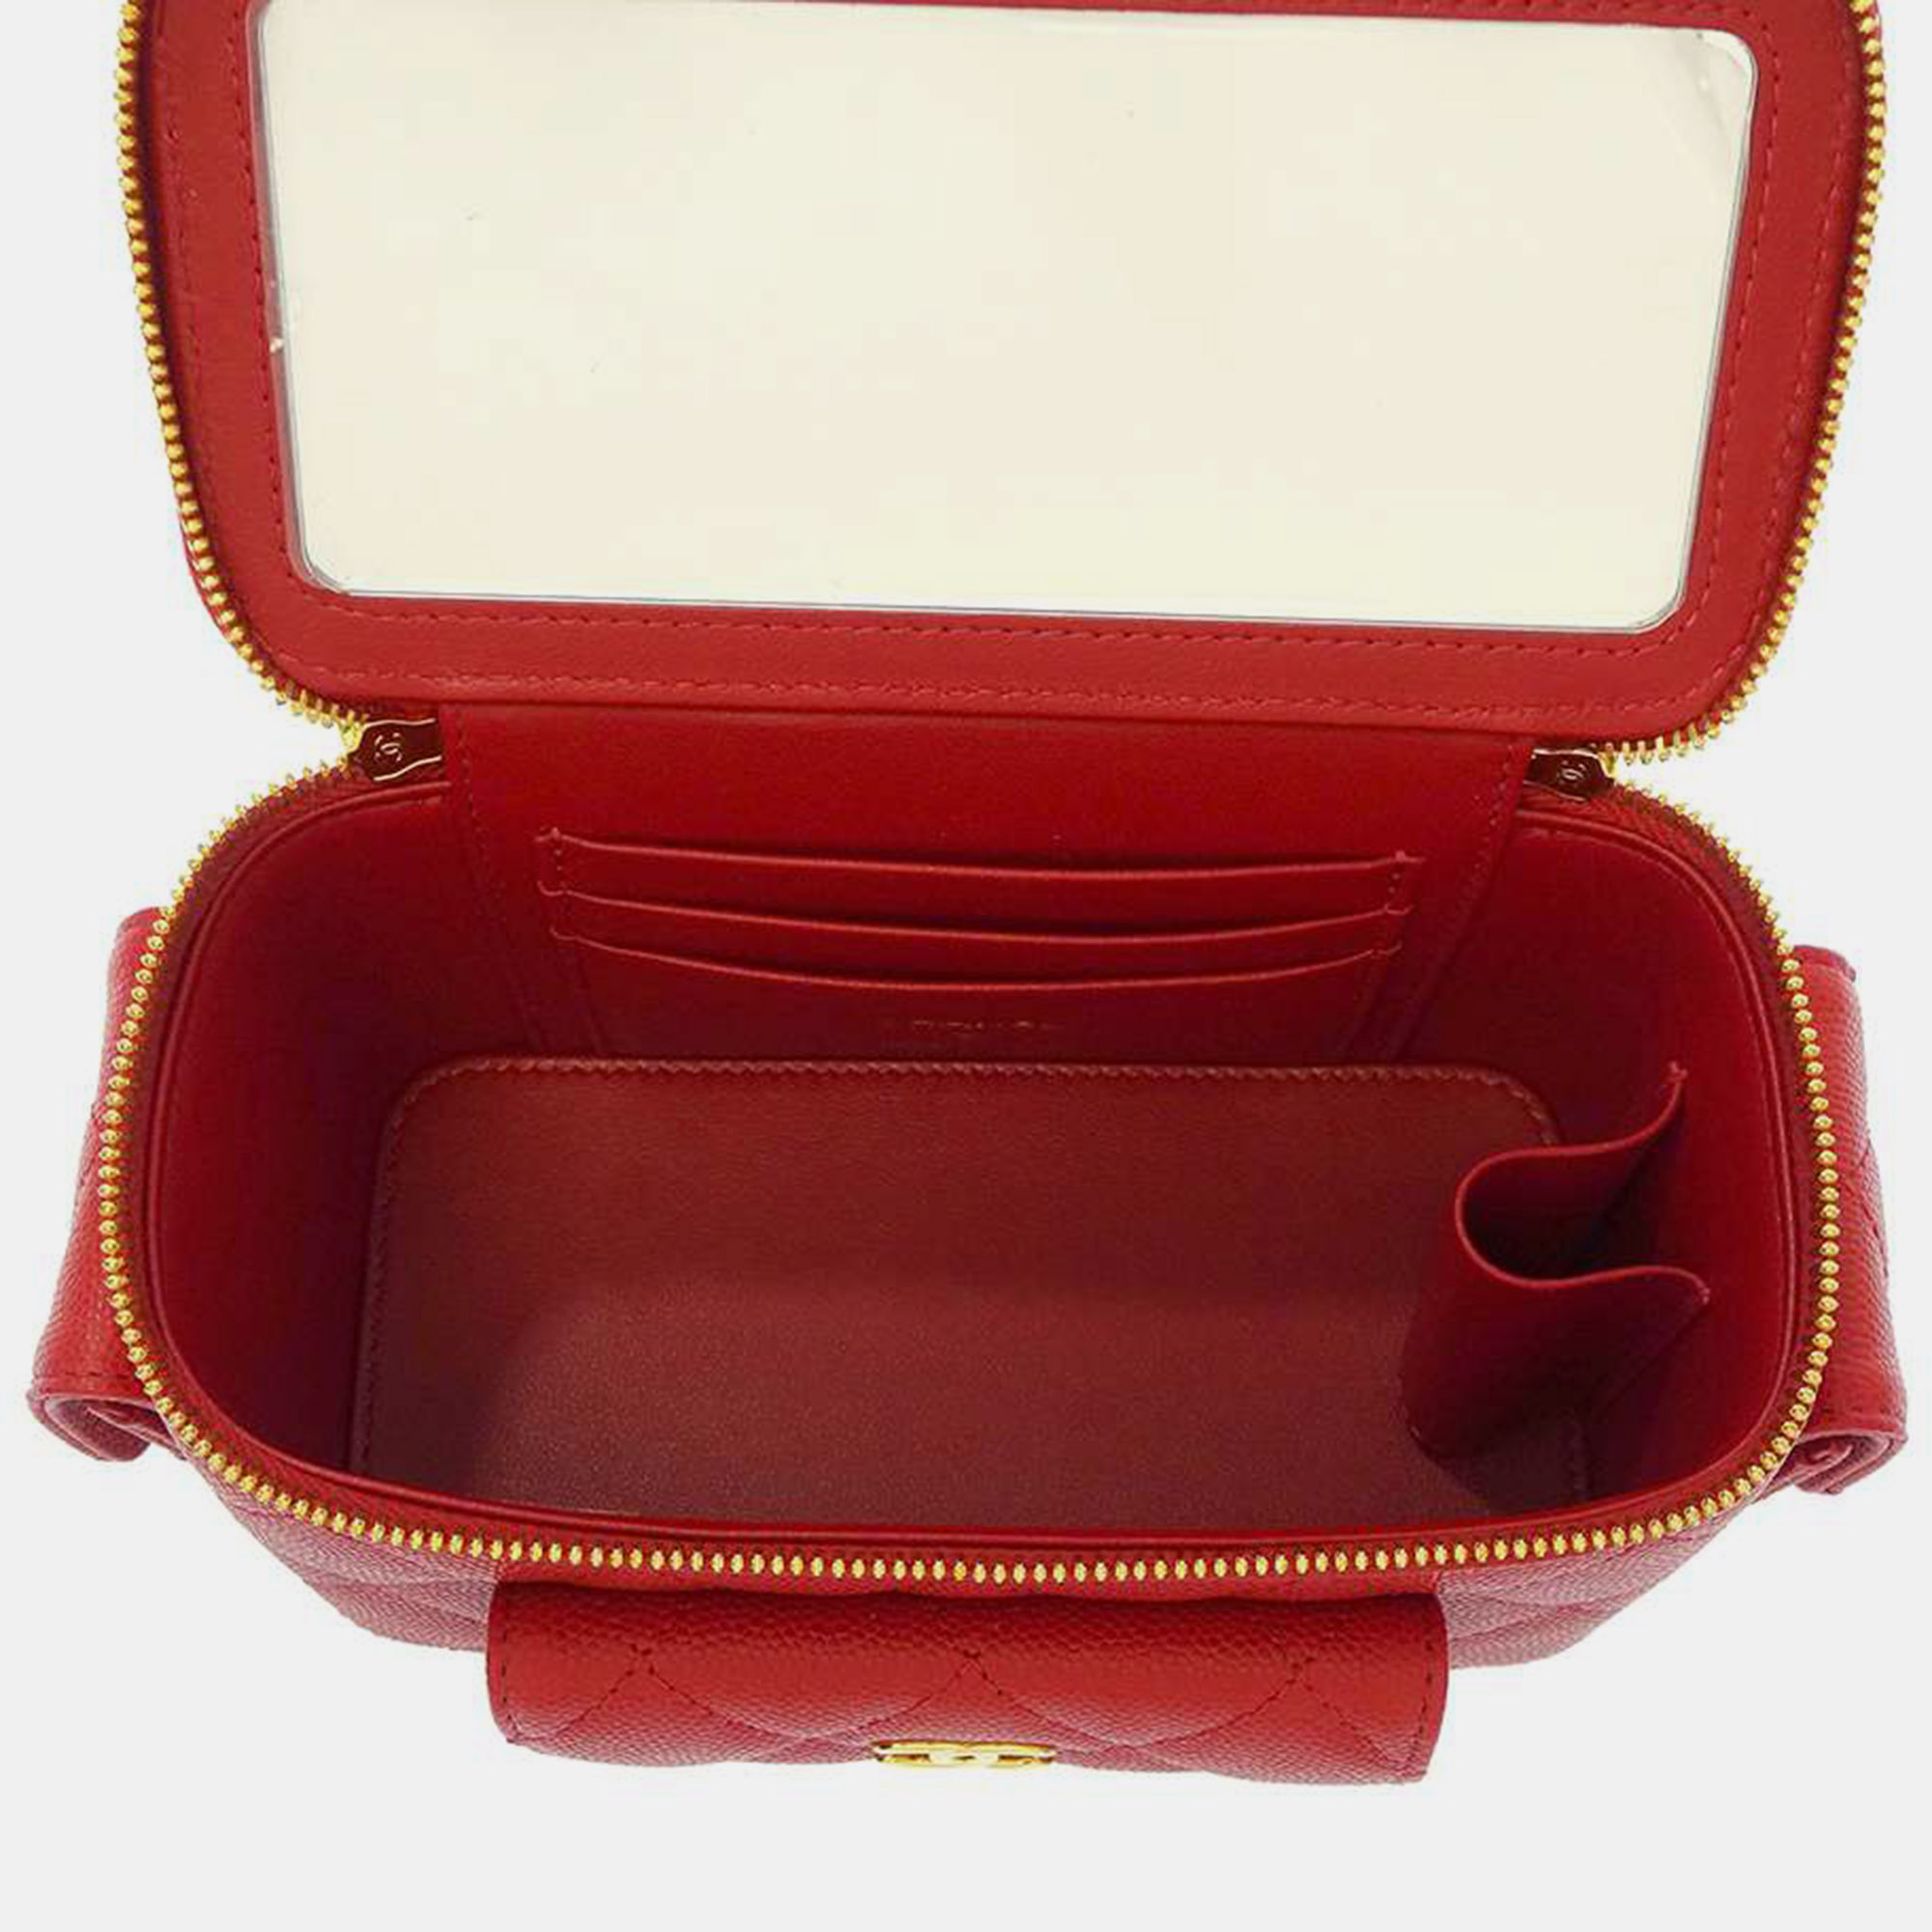 Chanel Red Leather Vanity Case